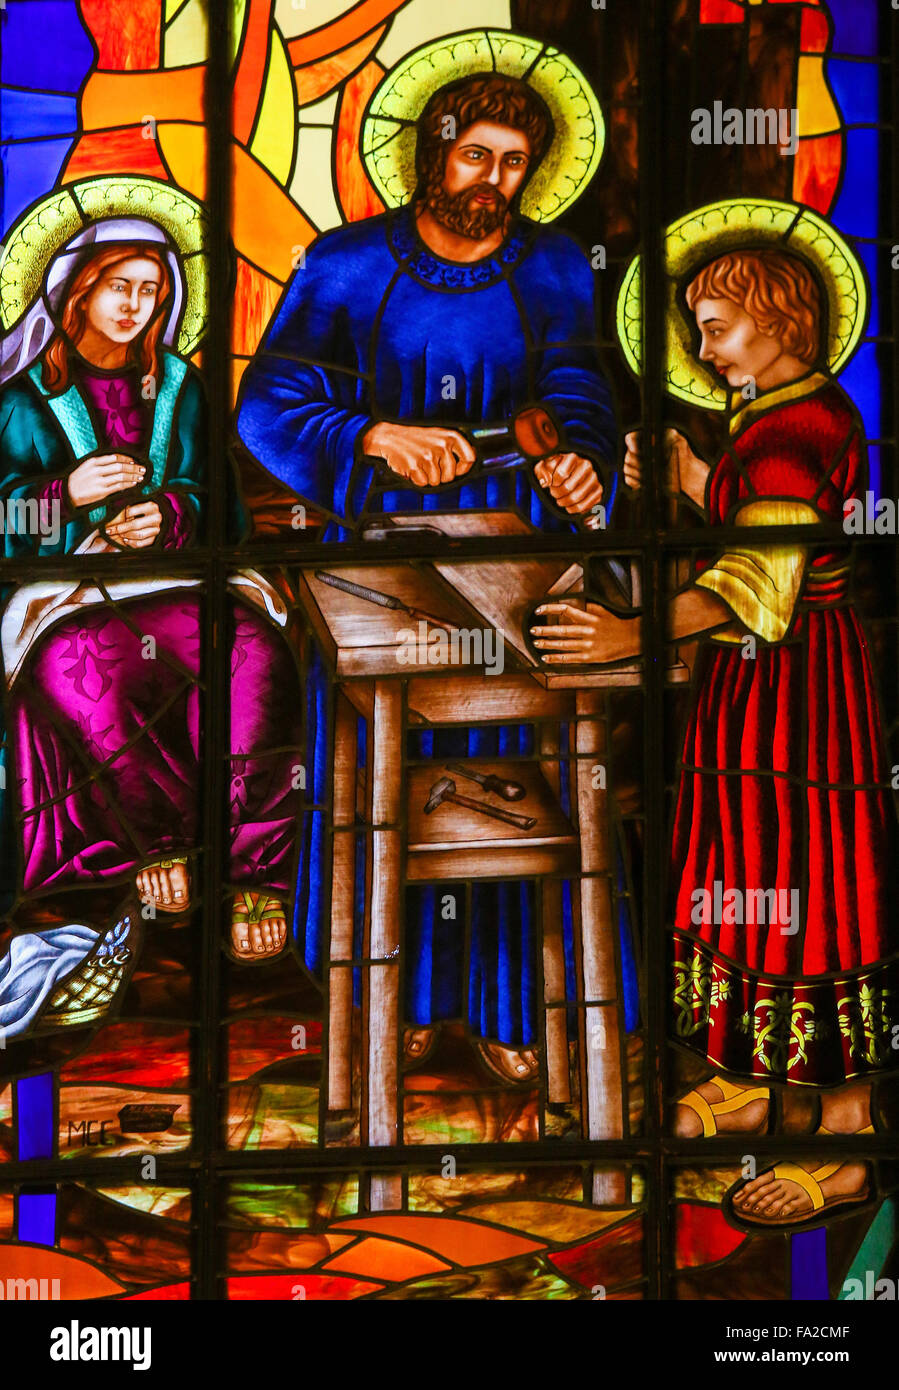 Stained Glass window depicting the Holy Family, Joseph, Mary and Jesus, in the Cathedral of Madrid Stock Photo